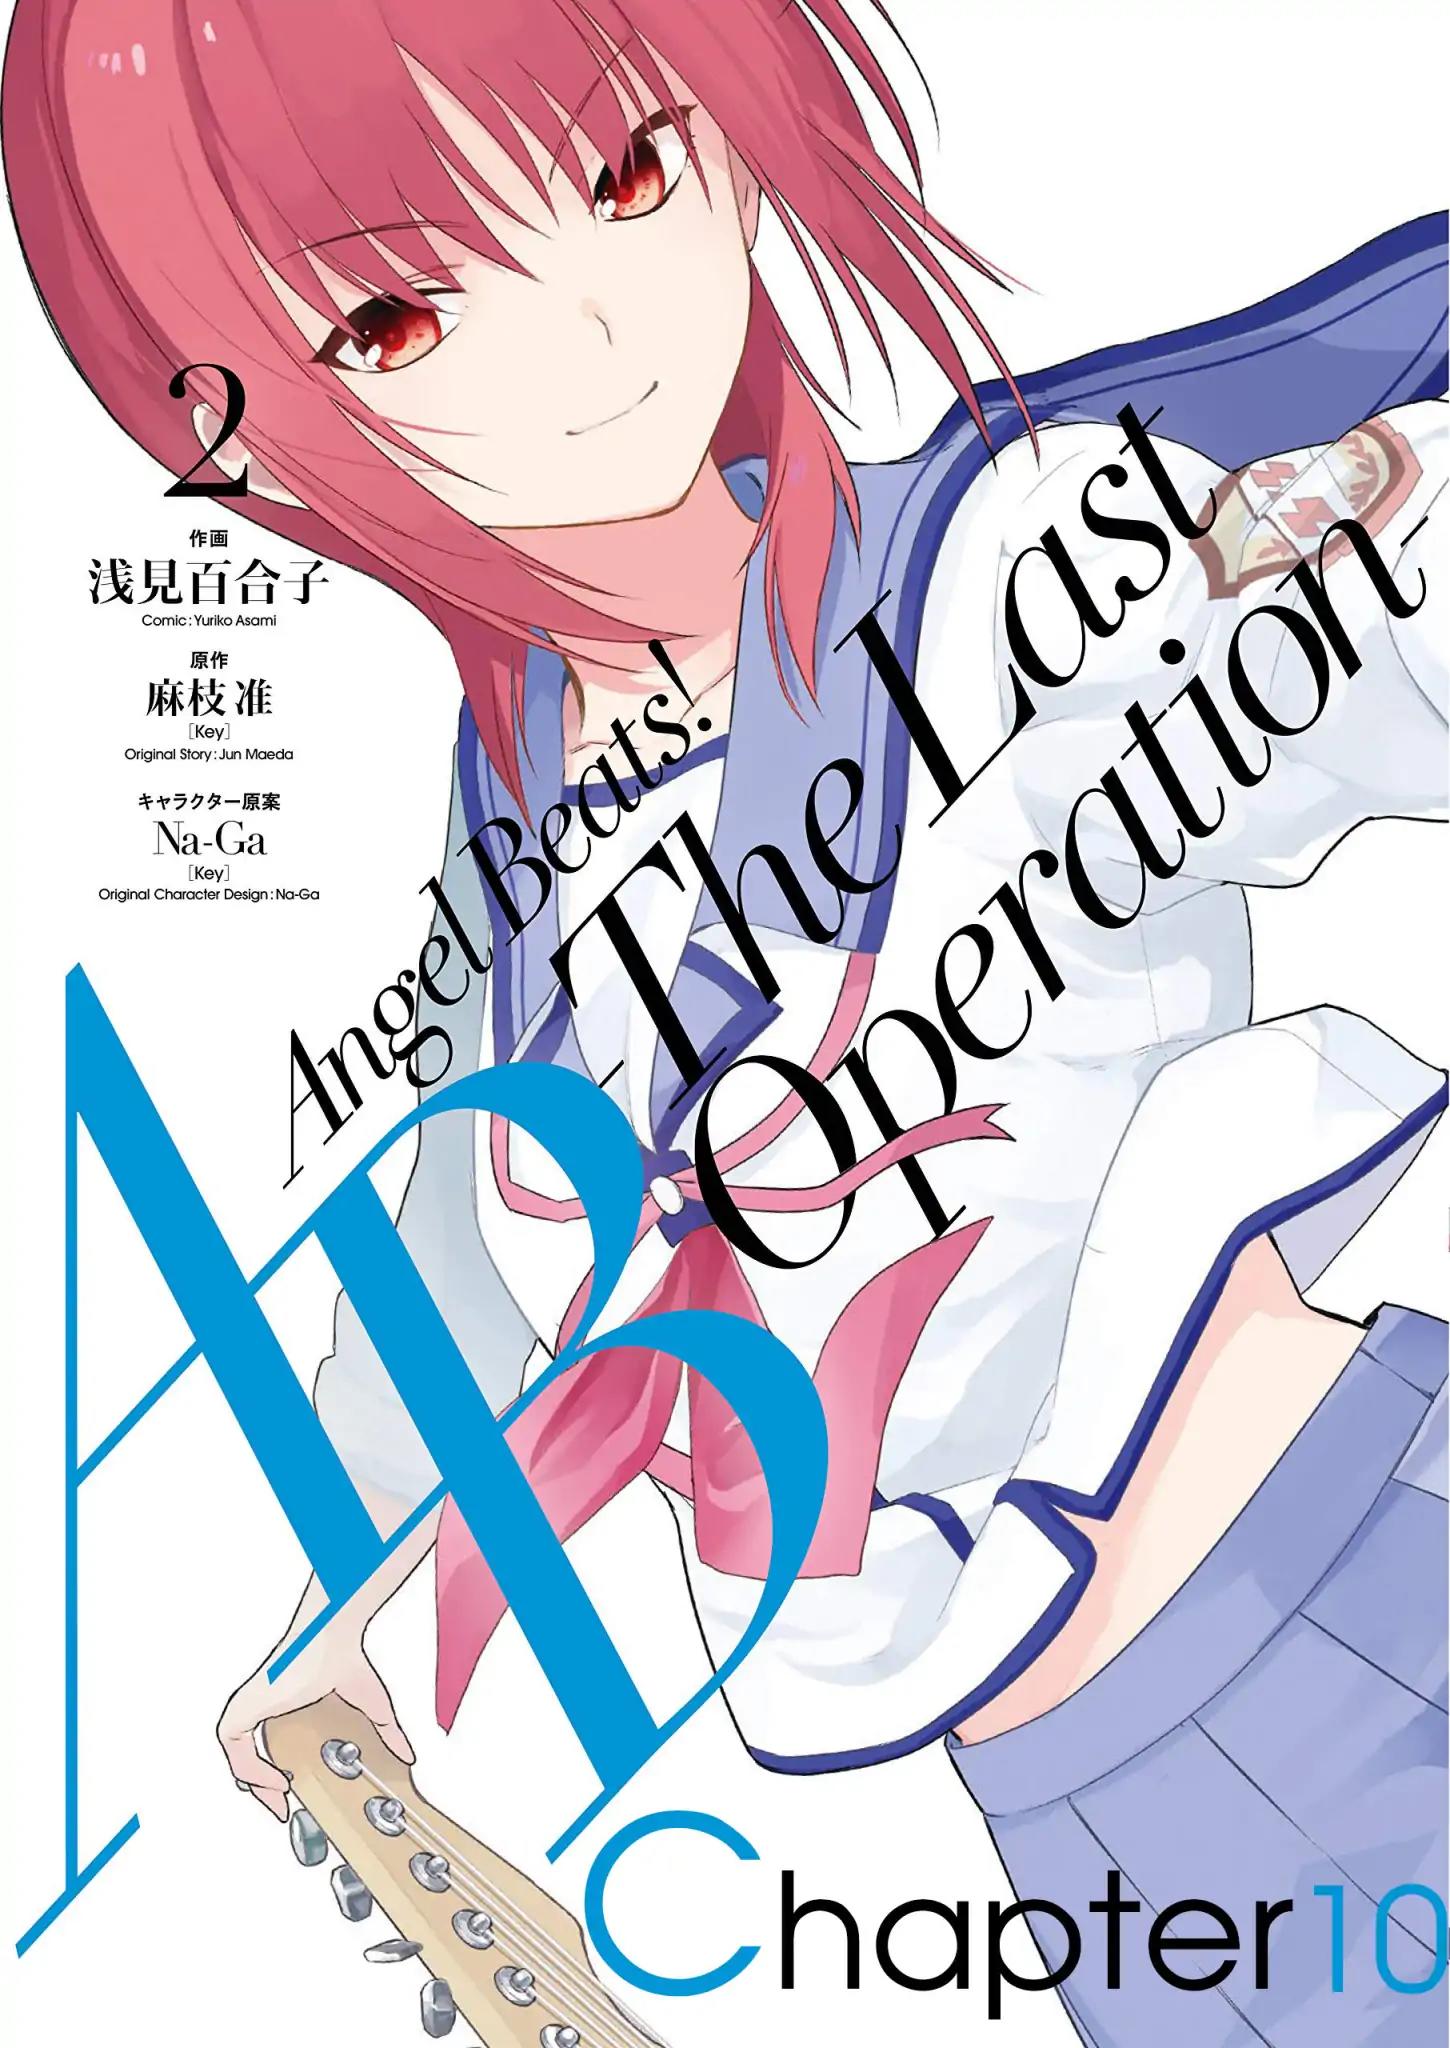 Angel Beats! -The Last Operation- Vol.2 Chapter 10